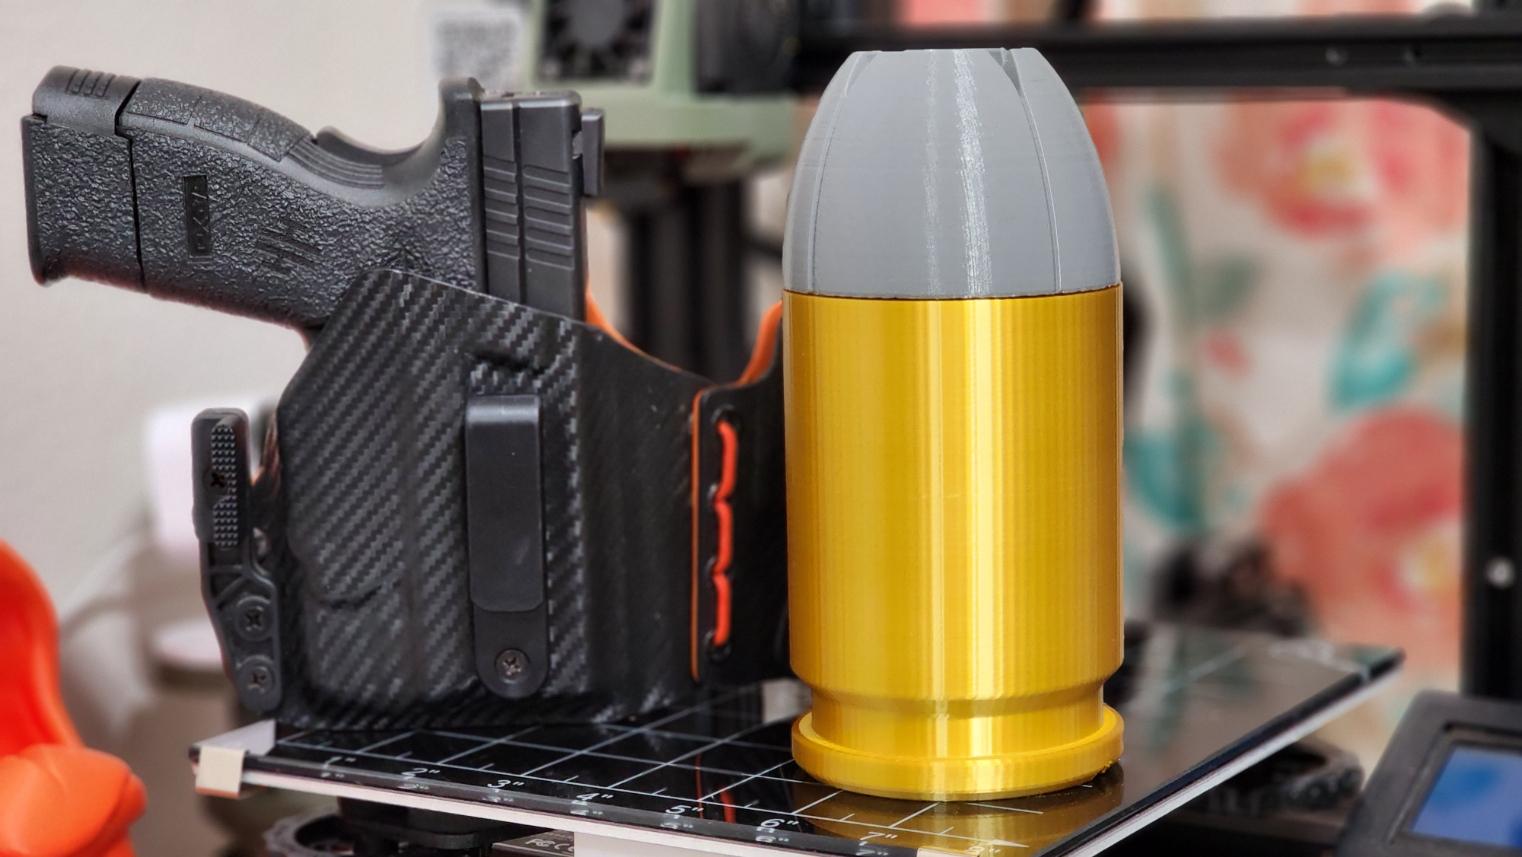 9mm Hollow point Can Cup - 12oz - Awesome Print! Matches perfectly next to my AirSoft equipment ;) 

Thank You! 

Overture Silk Gold 
PrintBed Grey! - 3d model